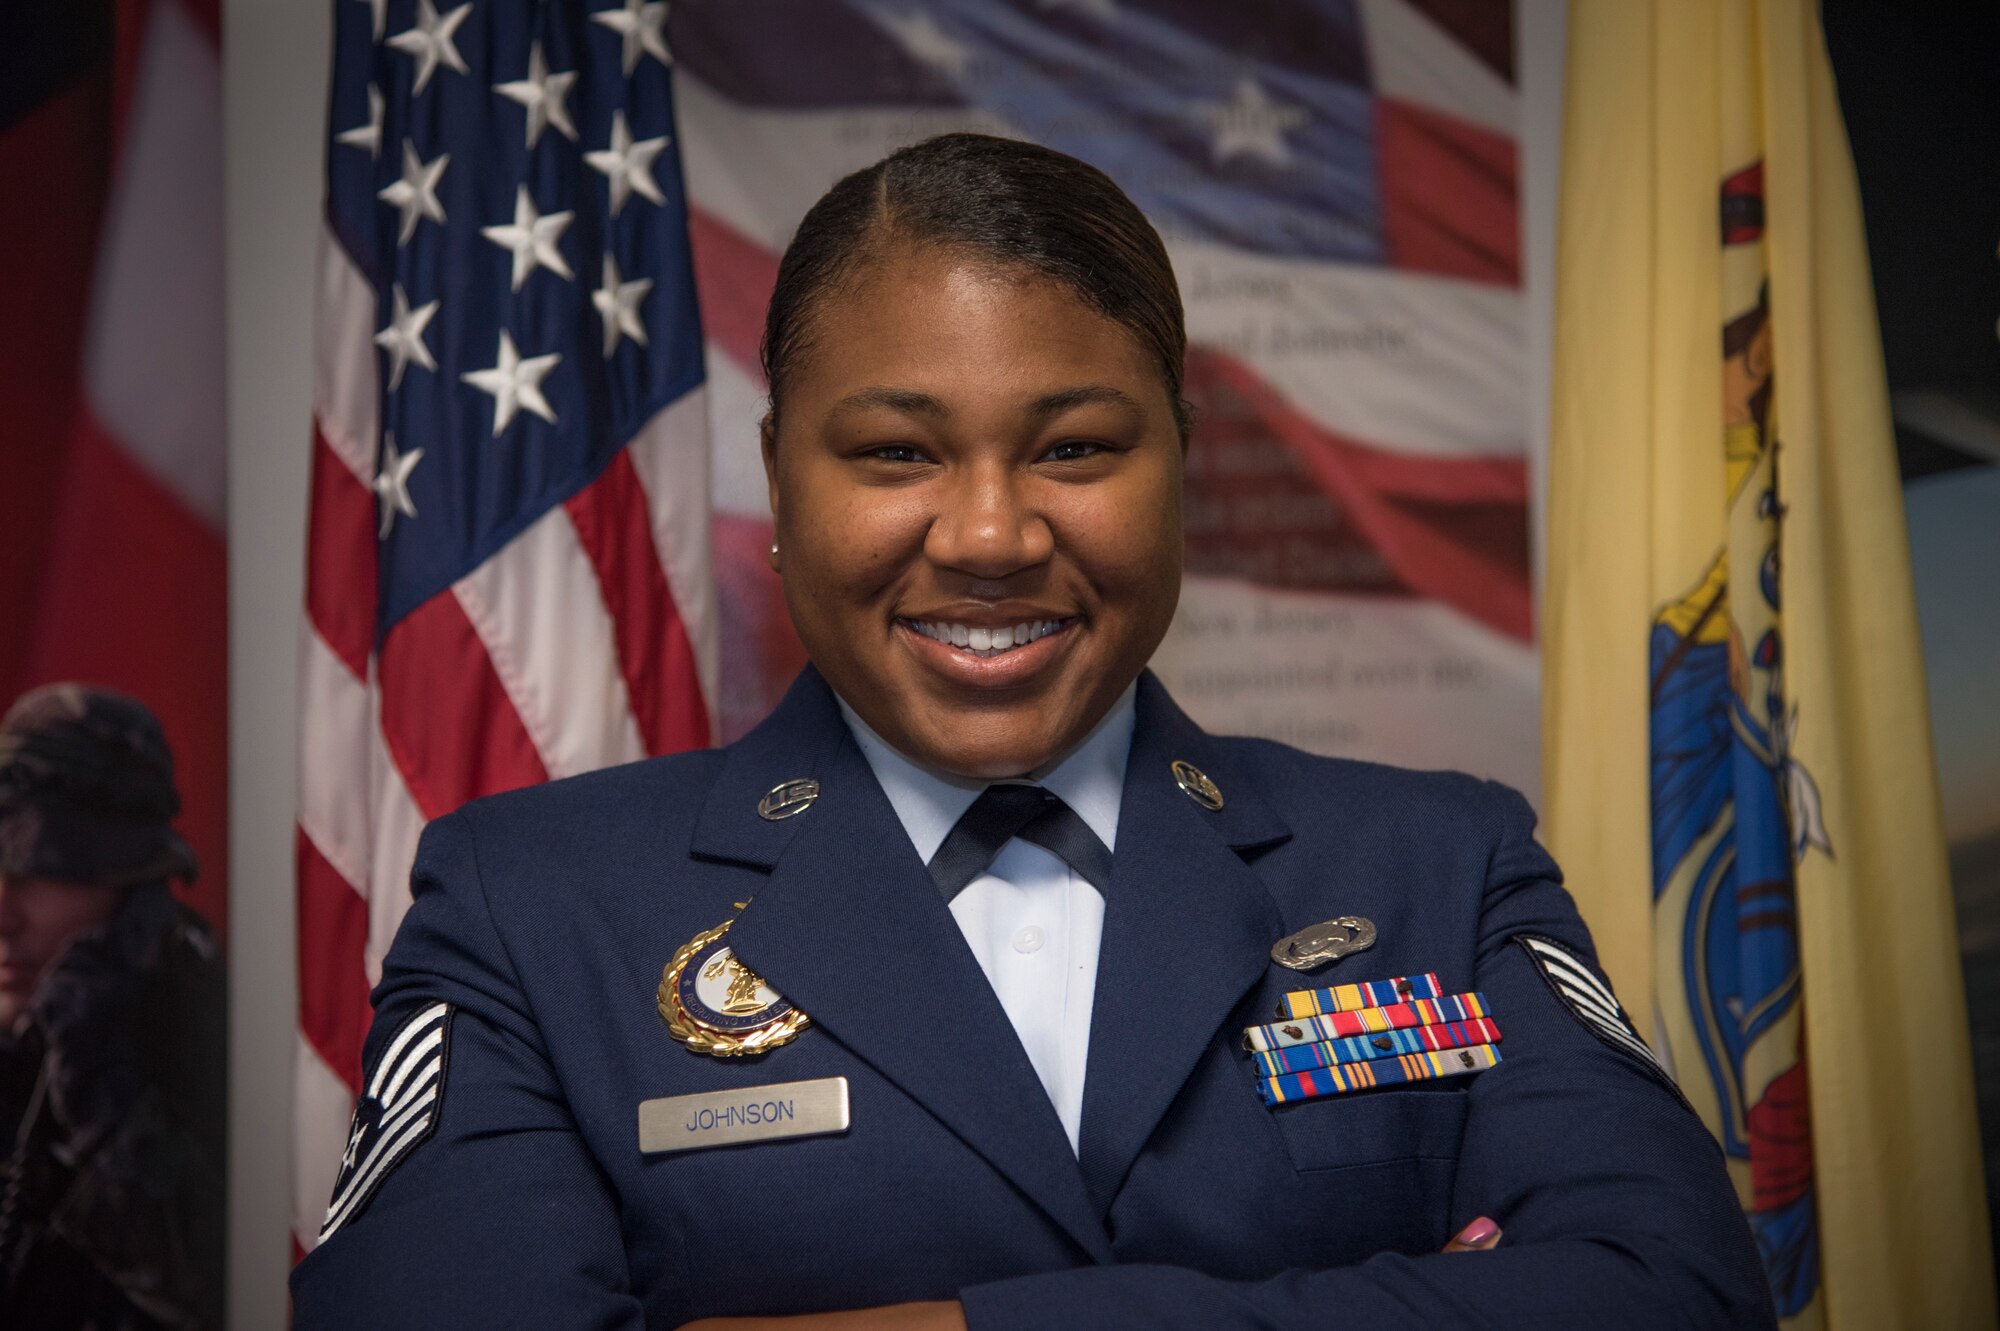 Tech Sgt. Jazlyn L. Johnson, a production recruiter of the 108th wing, poses for a photo at Joint Base McGuire-Dix-Lakehurst, N.J., May 2, 2019. Johnson was honored by thhe National Guard Bureau and inducted into their 100th Century Club for enlisting her 100th member into the Air National Guard. (U.S. Air National Guard photo by Airman 1st Class Andrea A. S. Williamson)